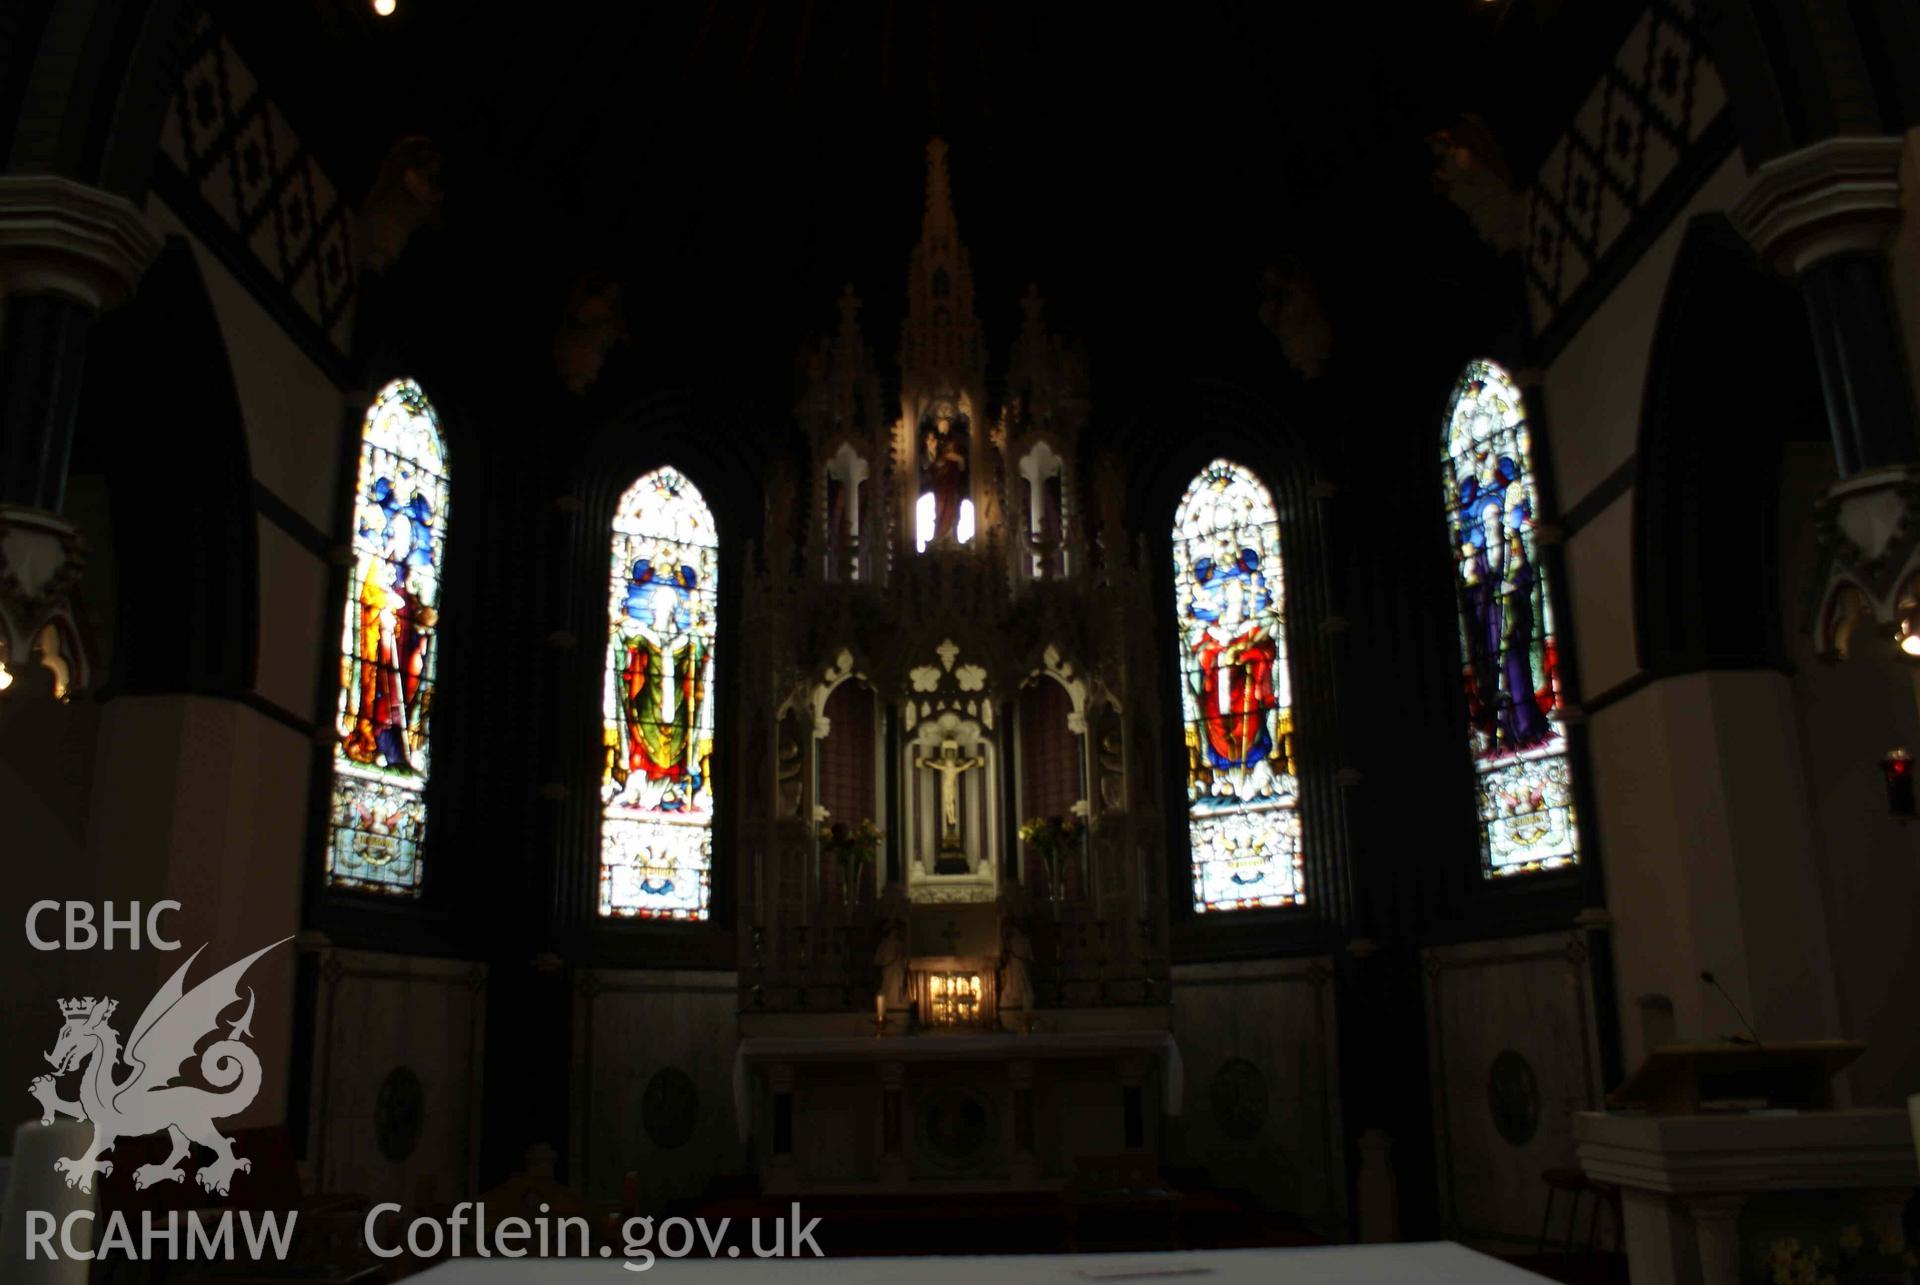 Digital colour photograph showing stained glass windows at St Illtyd's Catholic church, Dowlais.